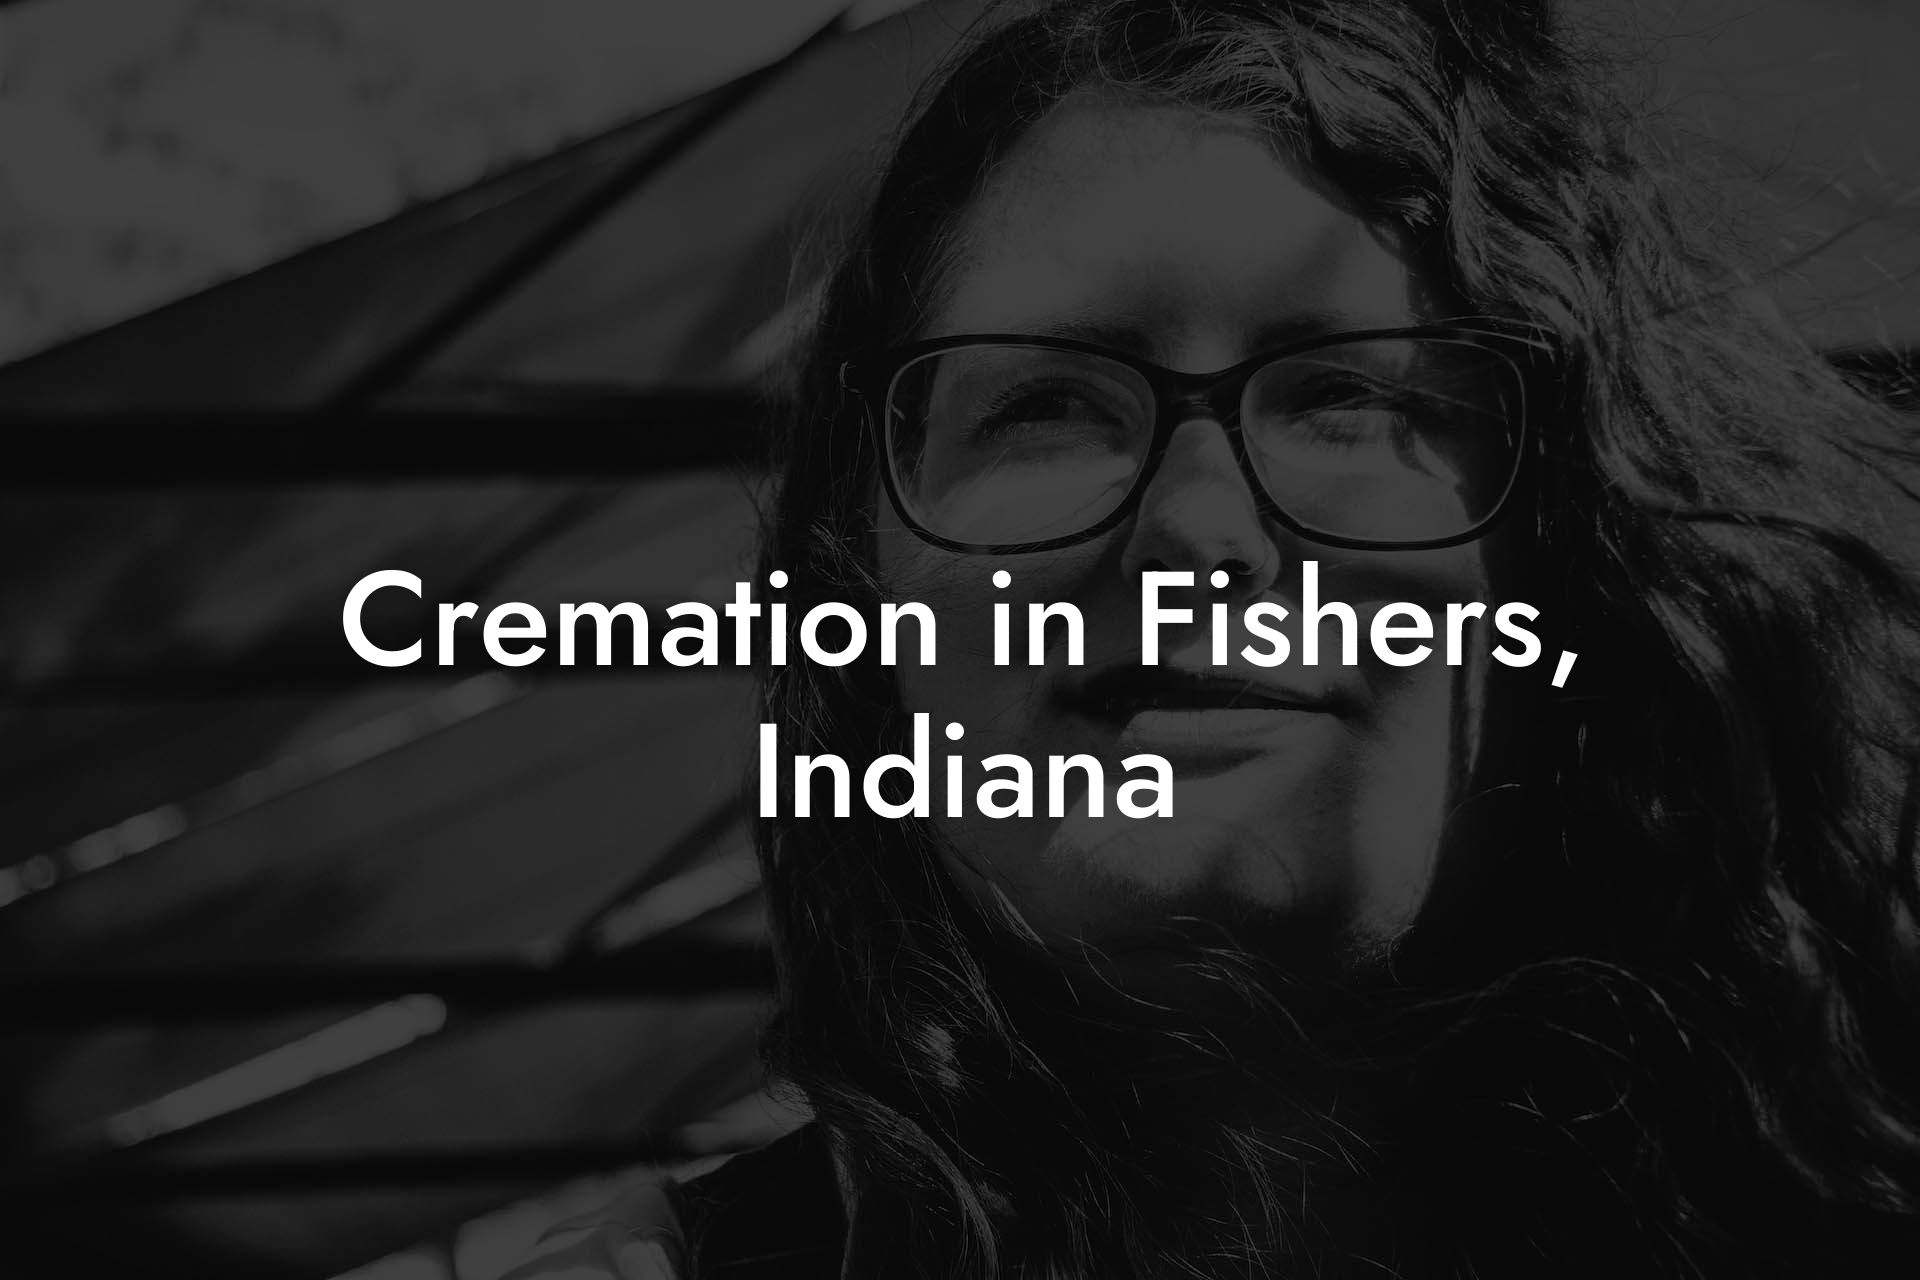 Cremation in Fishers, Indiana